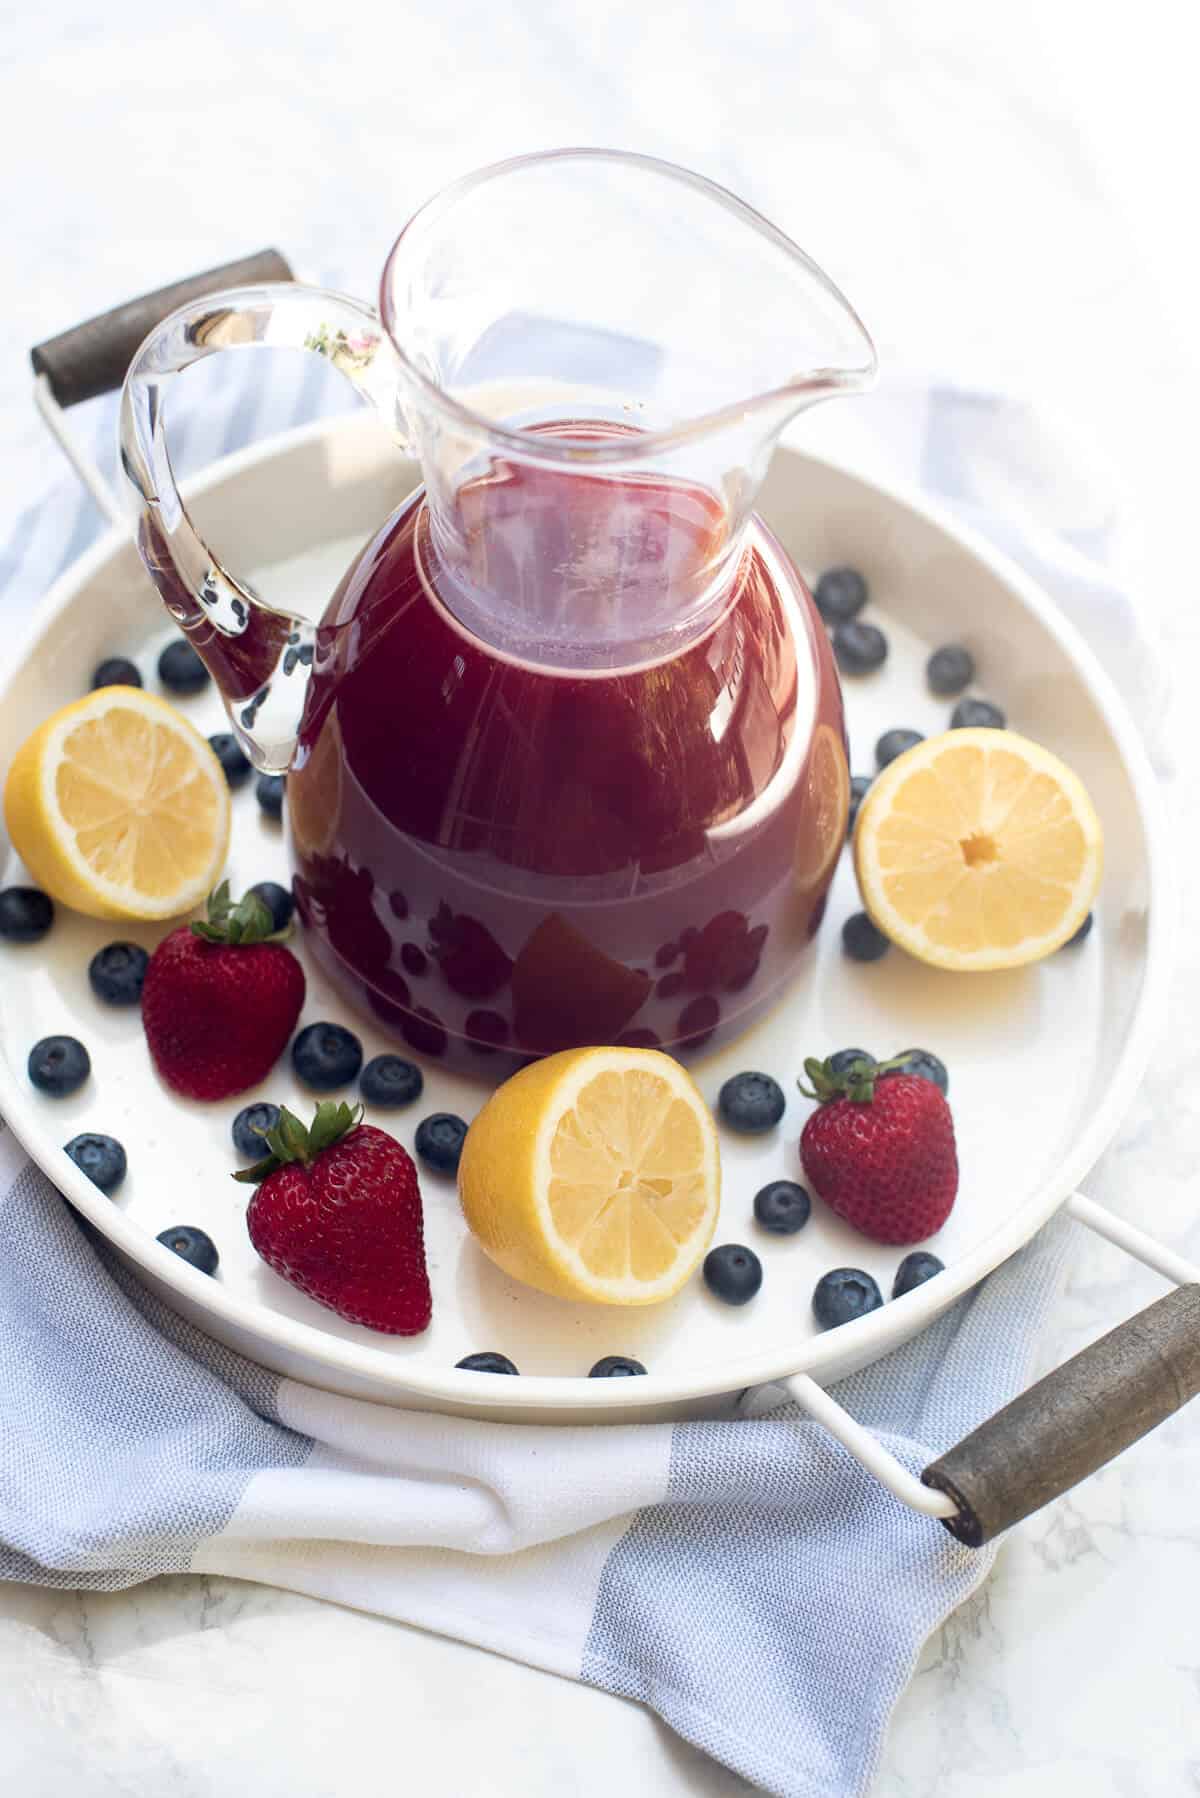 A pitcher of Berry Lemonade on a white tray with lemons and berries.